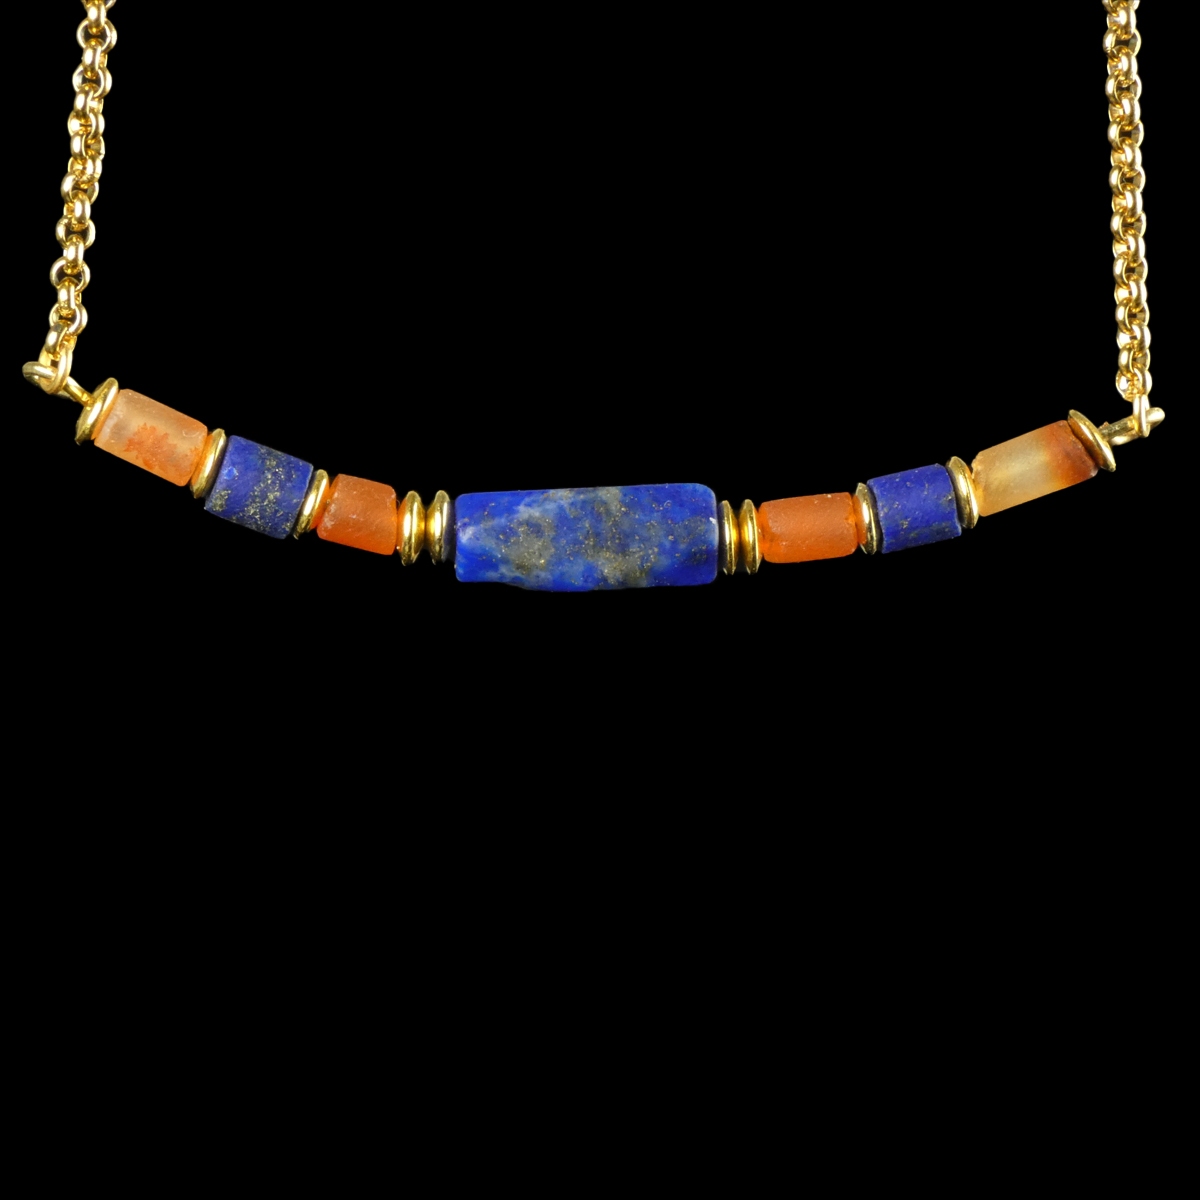 Necklace with Egyptian Lapis Lazuli and carnelian beads